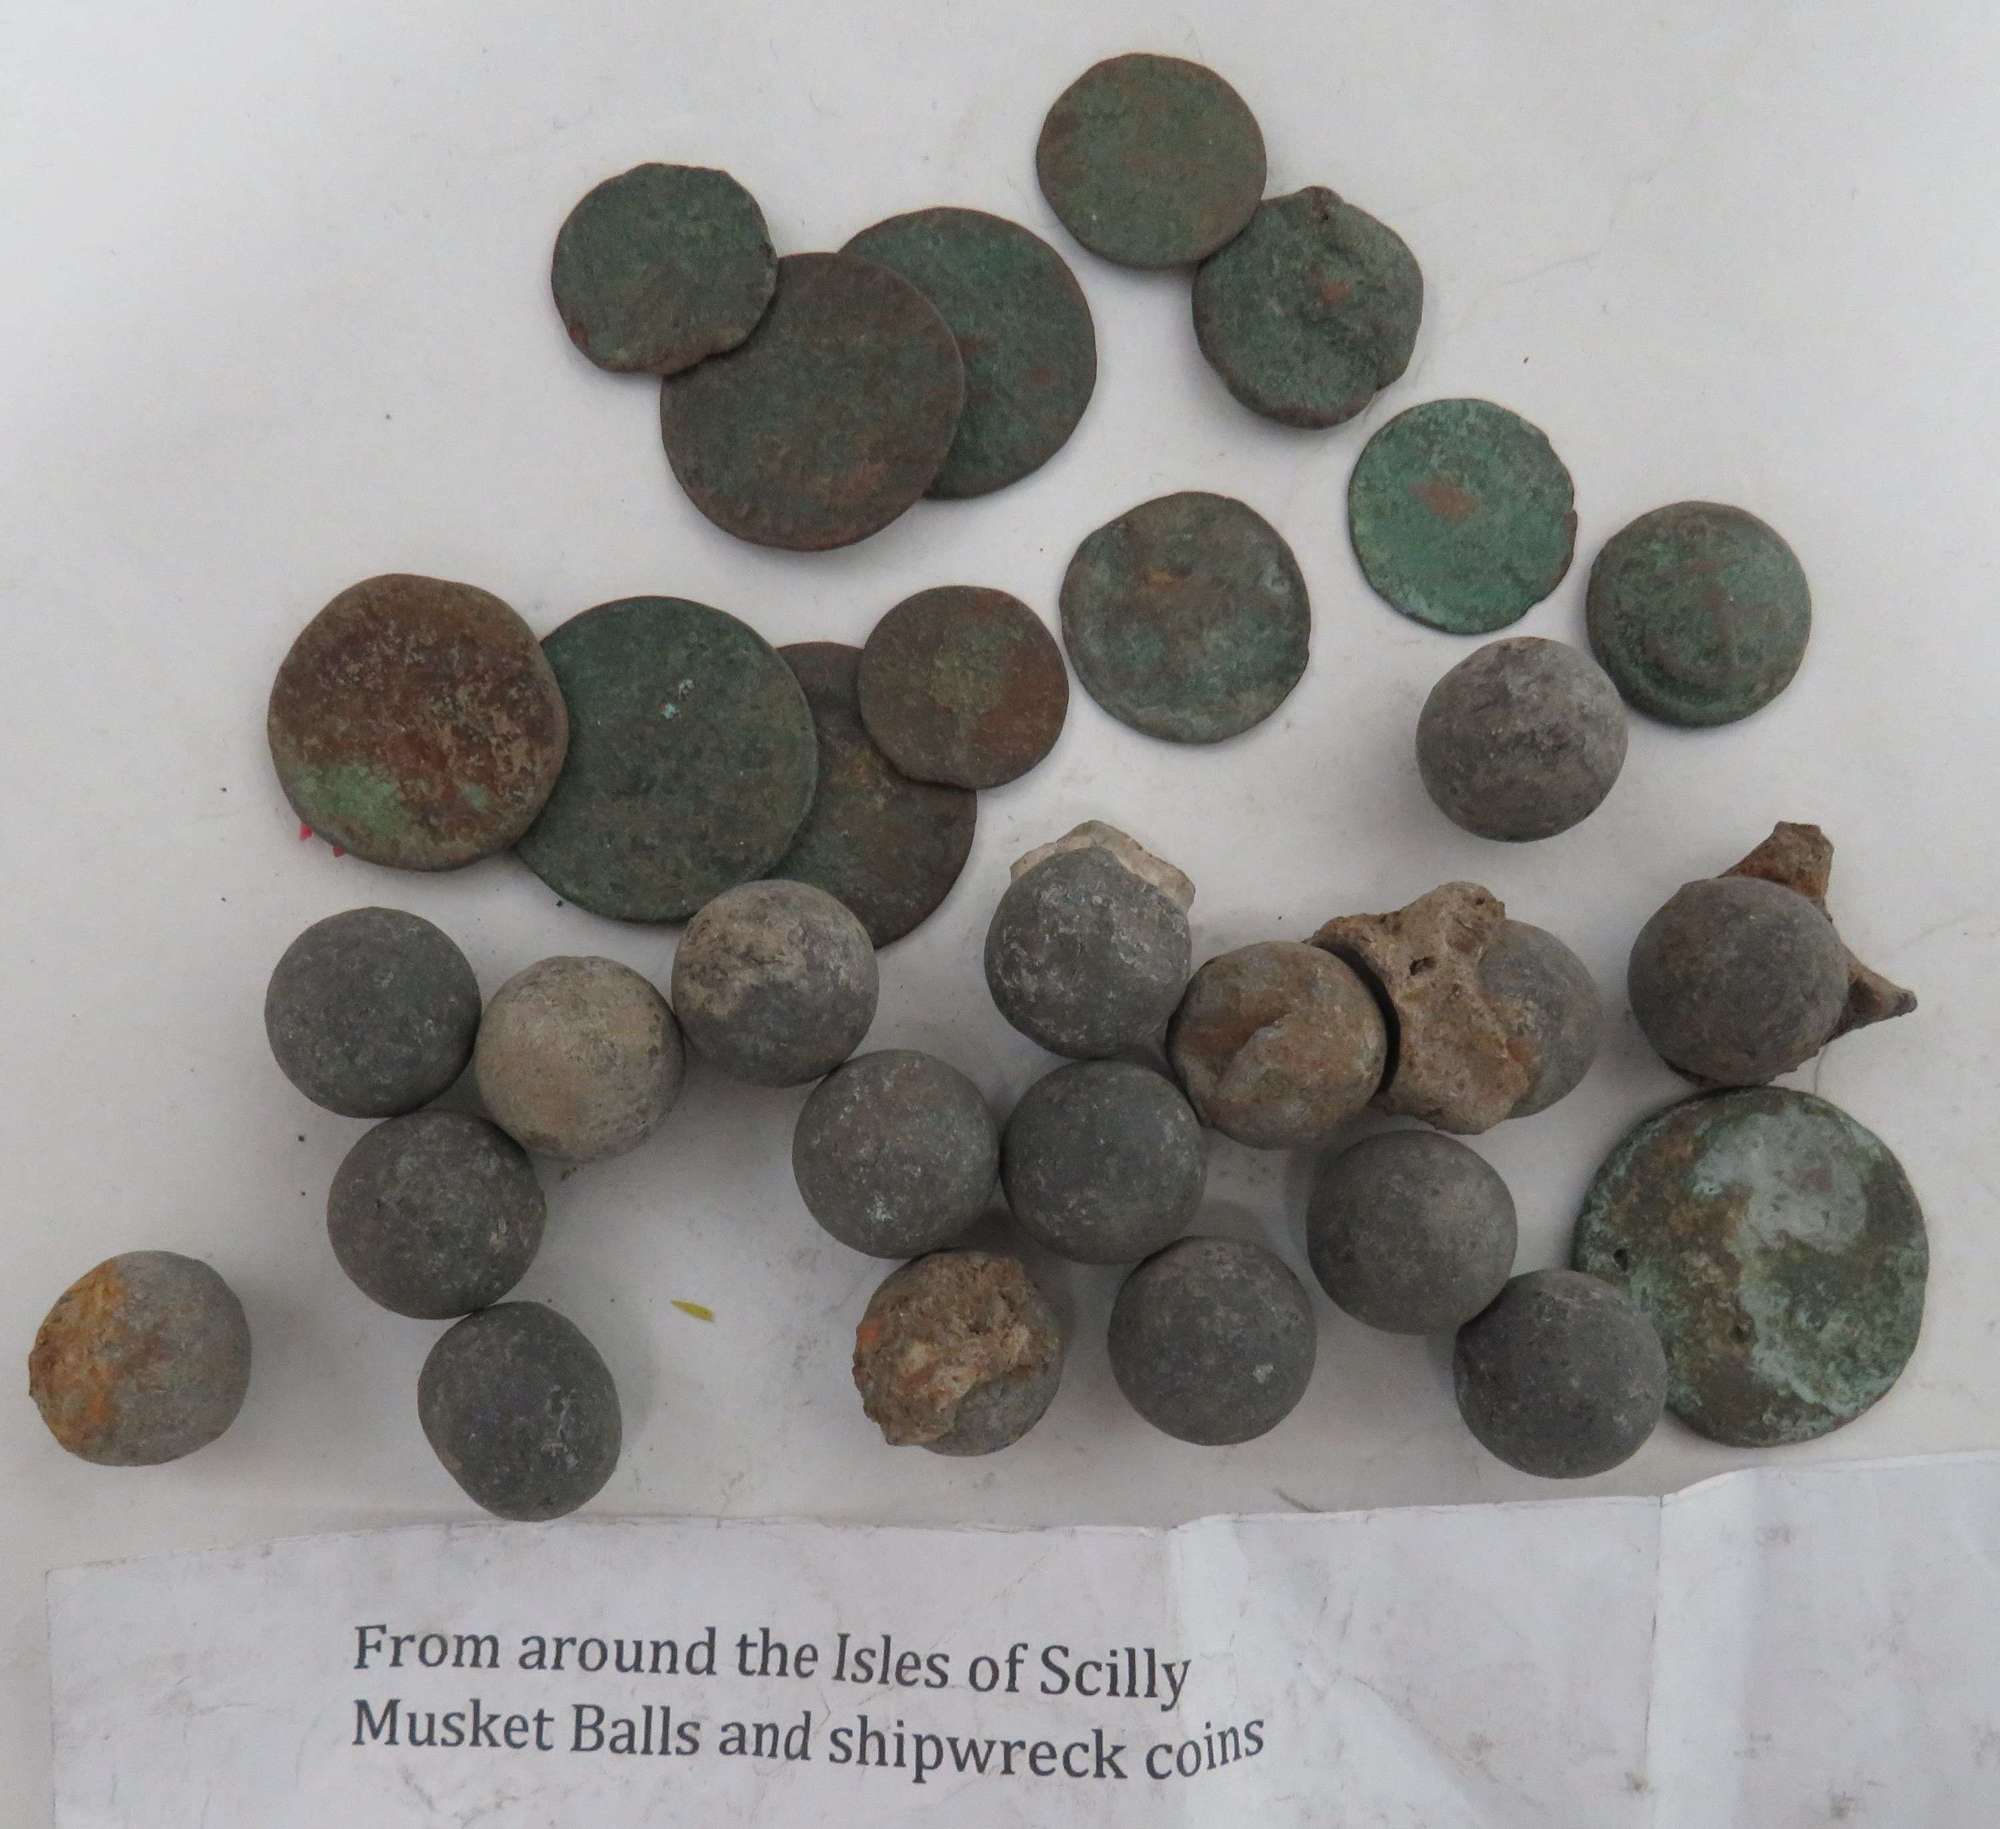 Diving Artifacts From the Scilly Islands Collected in the 1970s